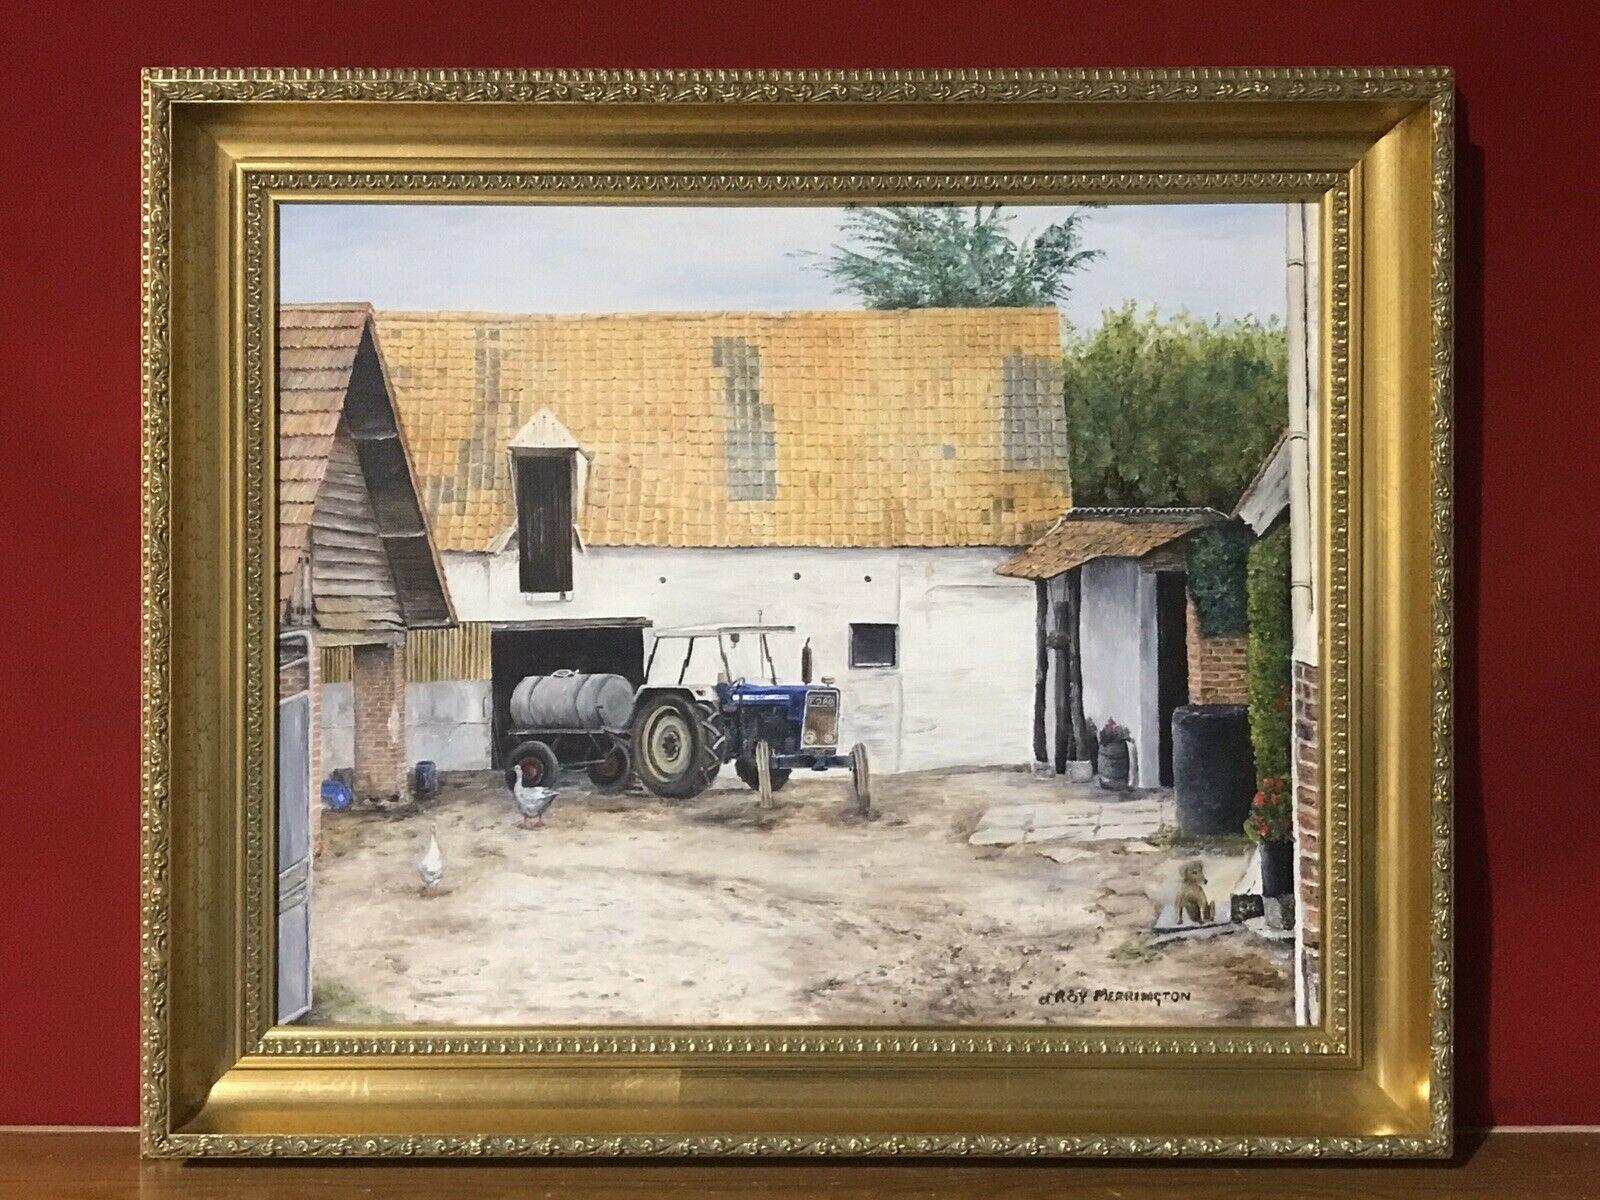 VINTAGE ENGLISH OIL PAINTING - FARMYARD BUILDINGS WITH TRACTOR & CHICKENS - Painting by Tommaso Principe